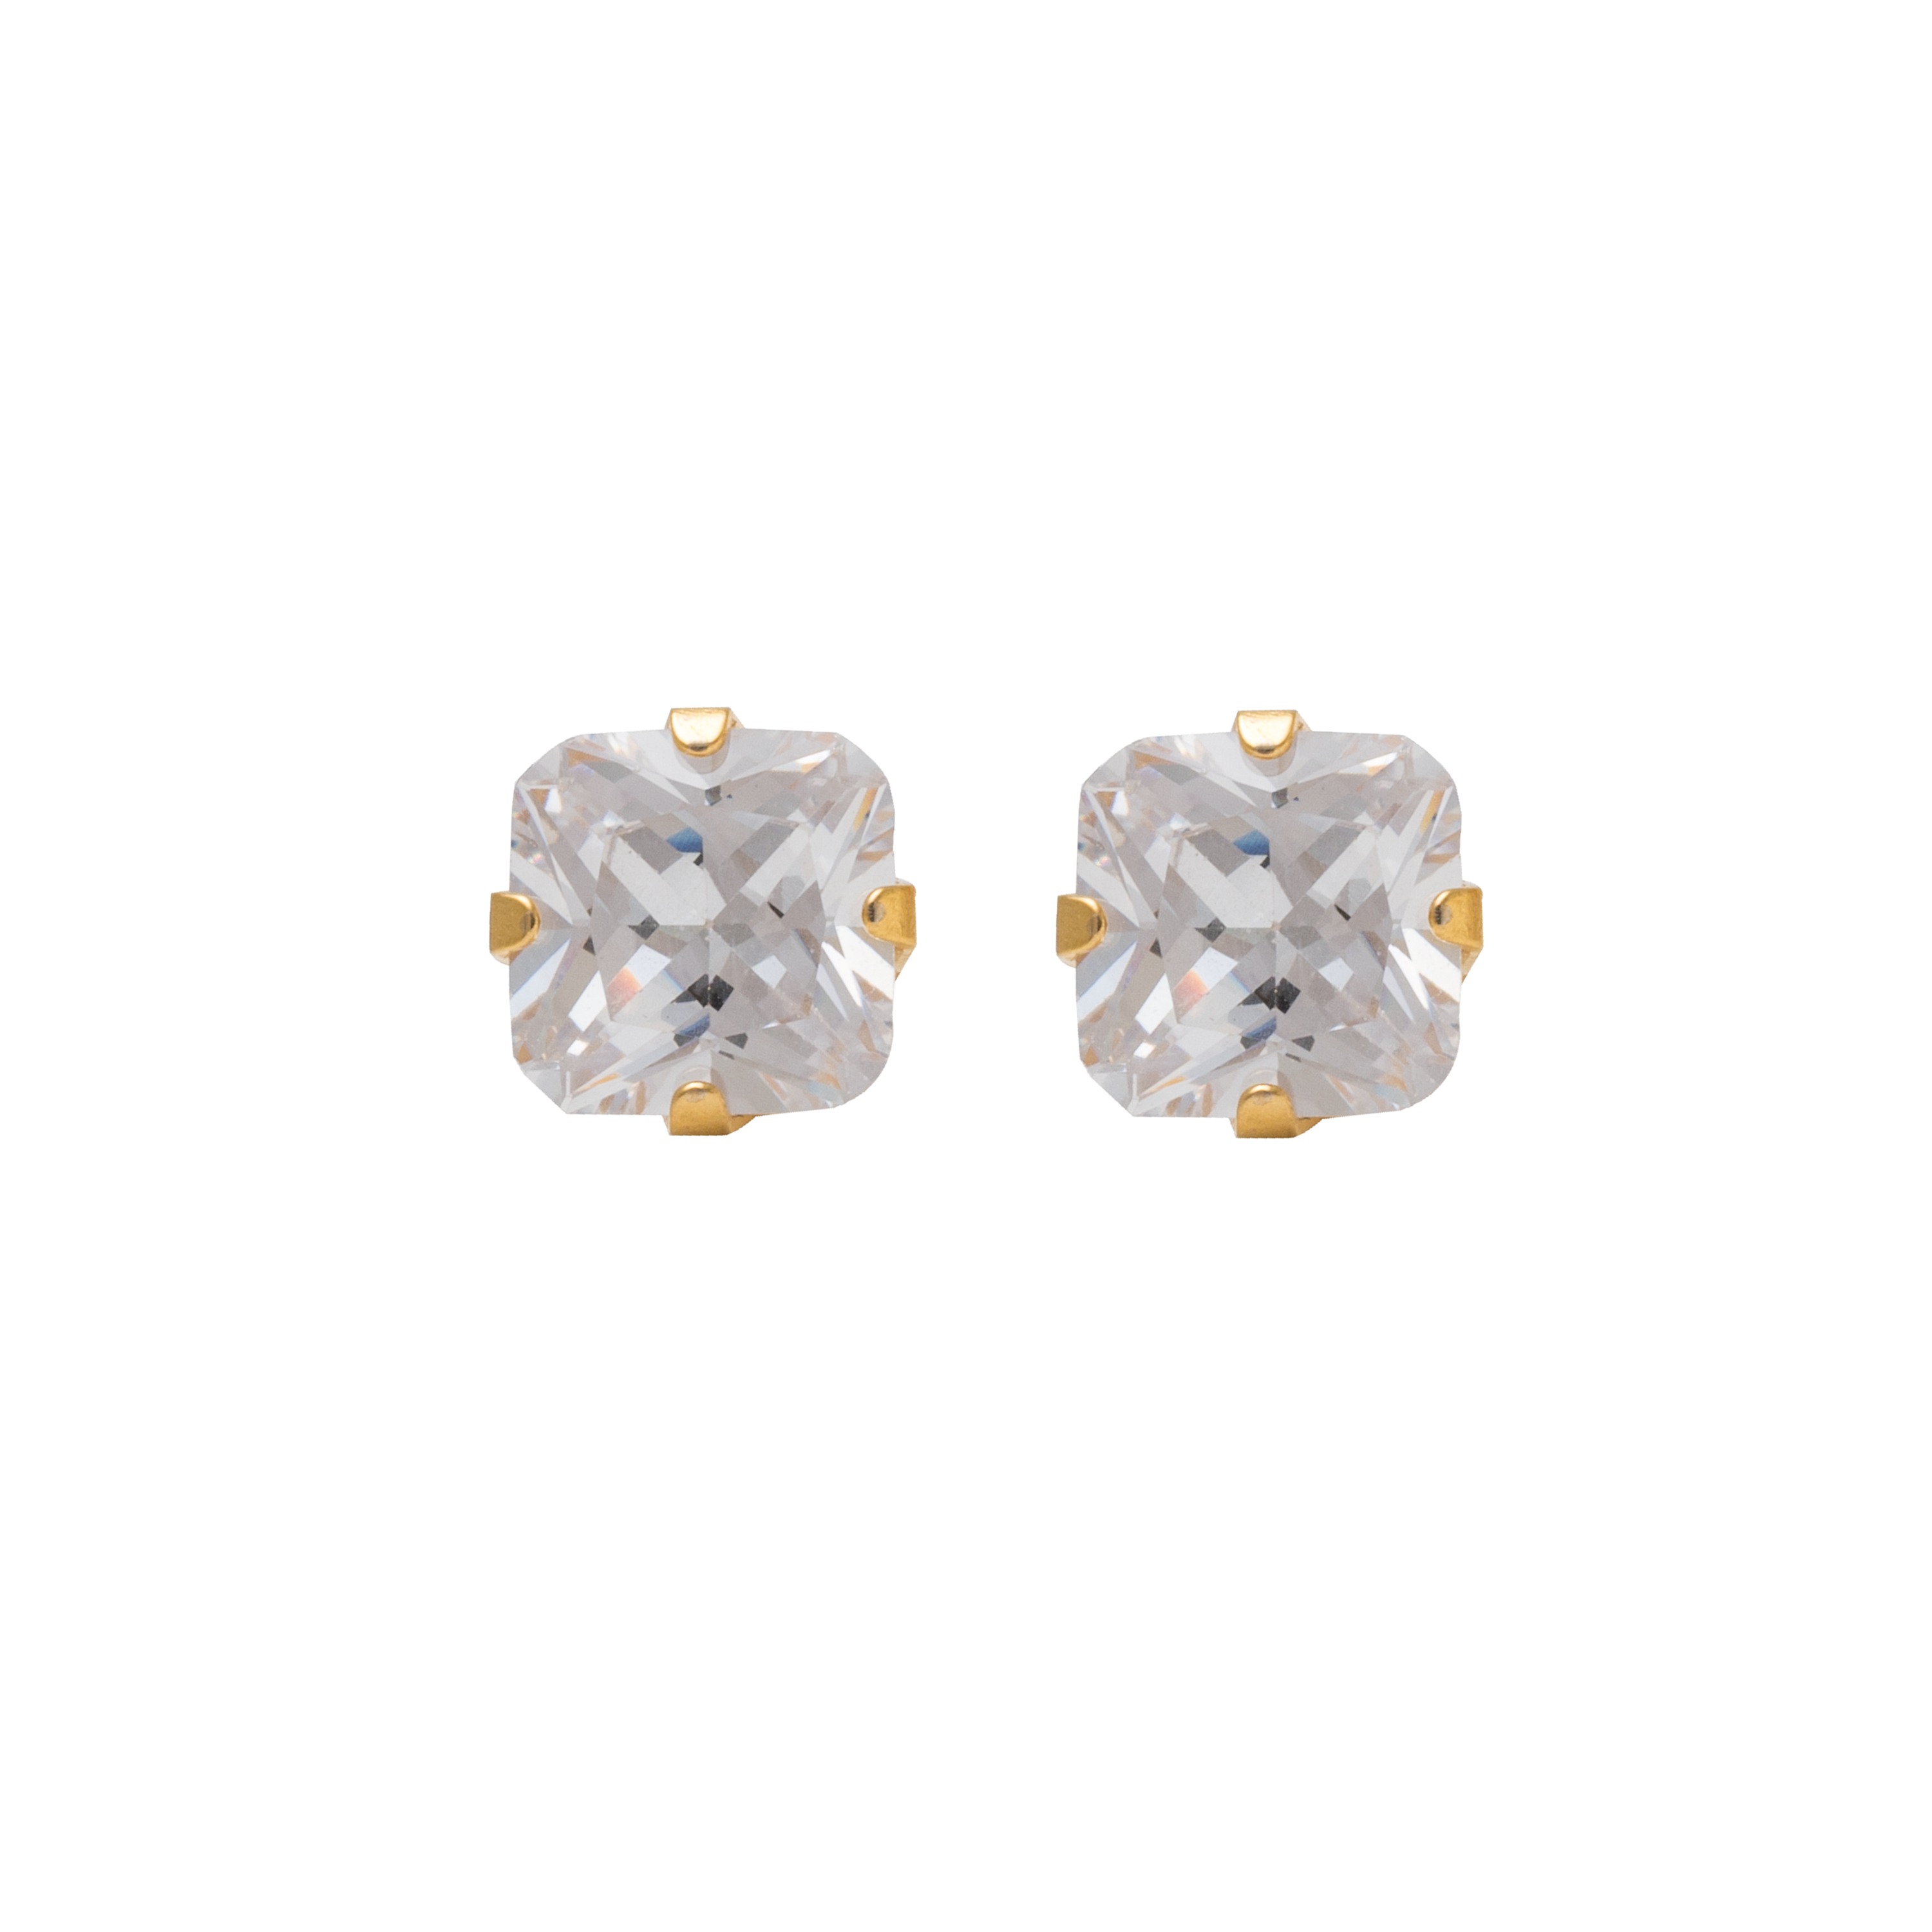 7*7MM - Princess Cut Cubic Zirconia (Square) - Crystal Clear | 24K Gold Plated Simple Yet Stylish, Cute & Trending Fashion Earrings / Ear Studs for Girls & Women Online @ Pakistan | Studex Sensitive (for daily wear)